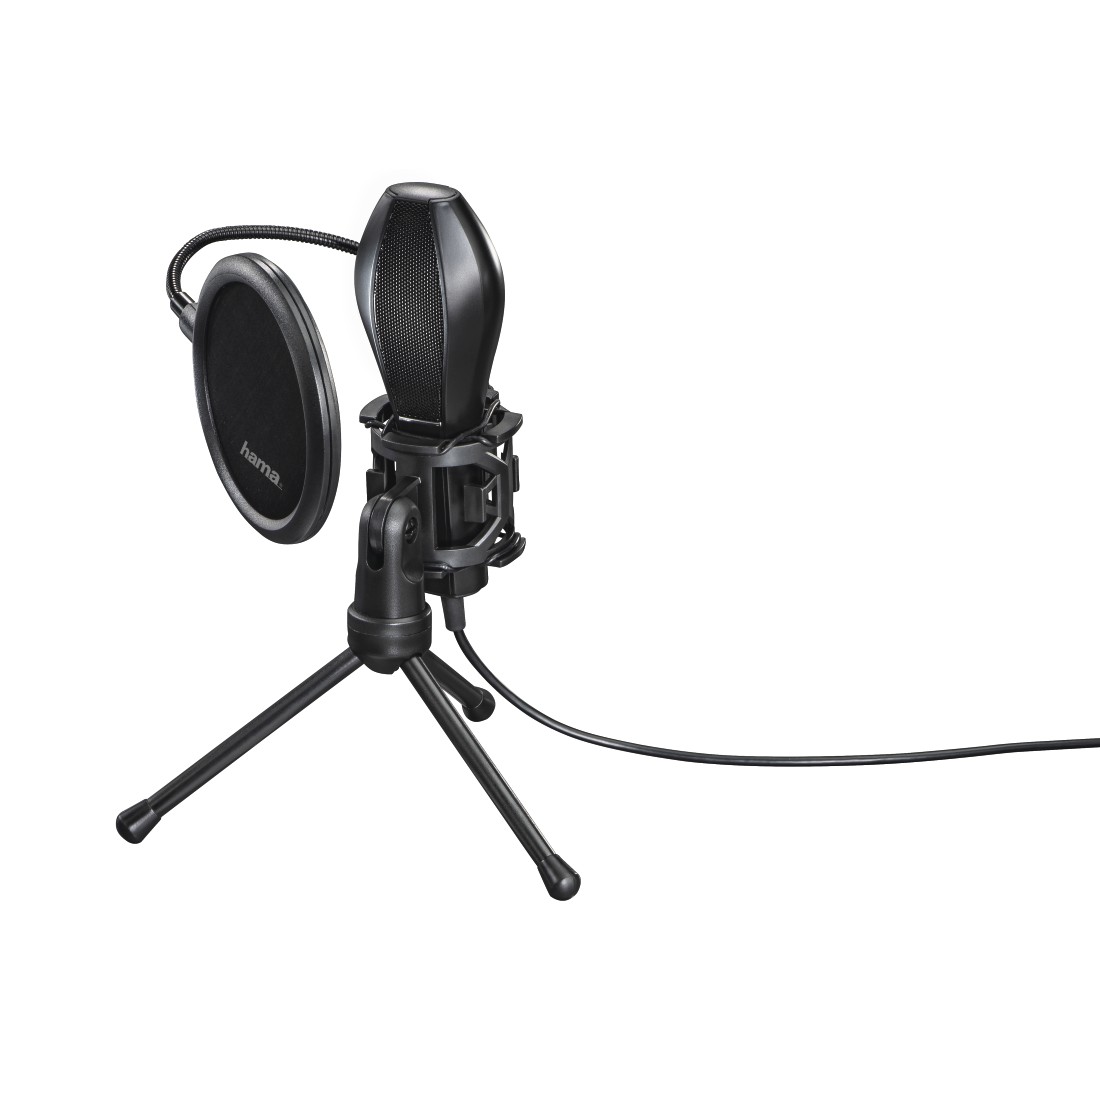 00139907 Hama "MIC-USB Stream" Microphone for PC and Notebook, USB